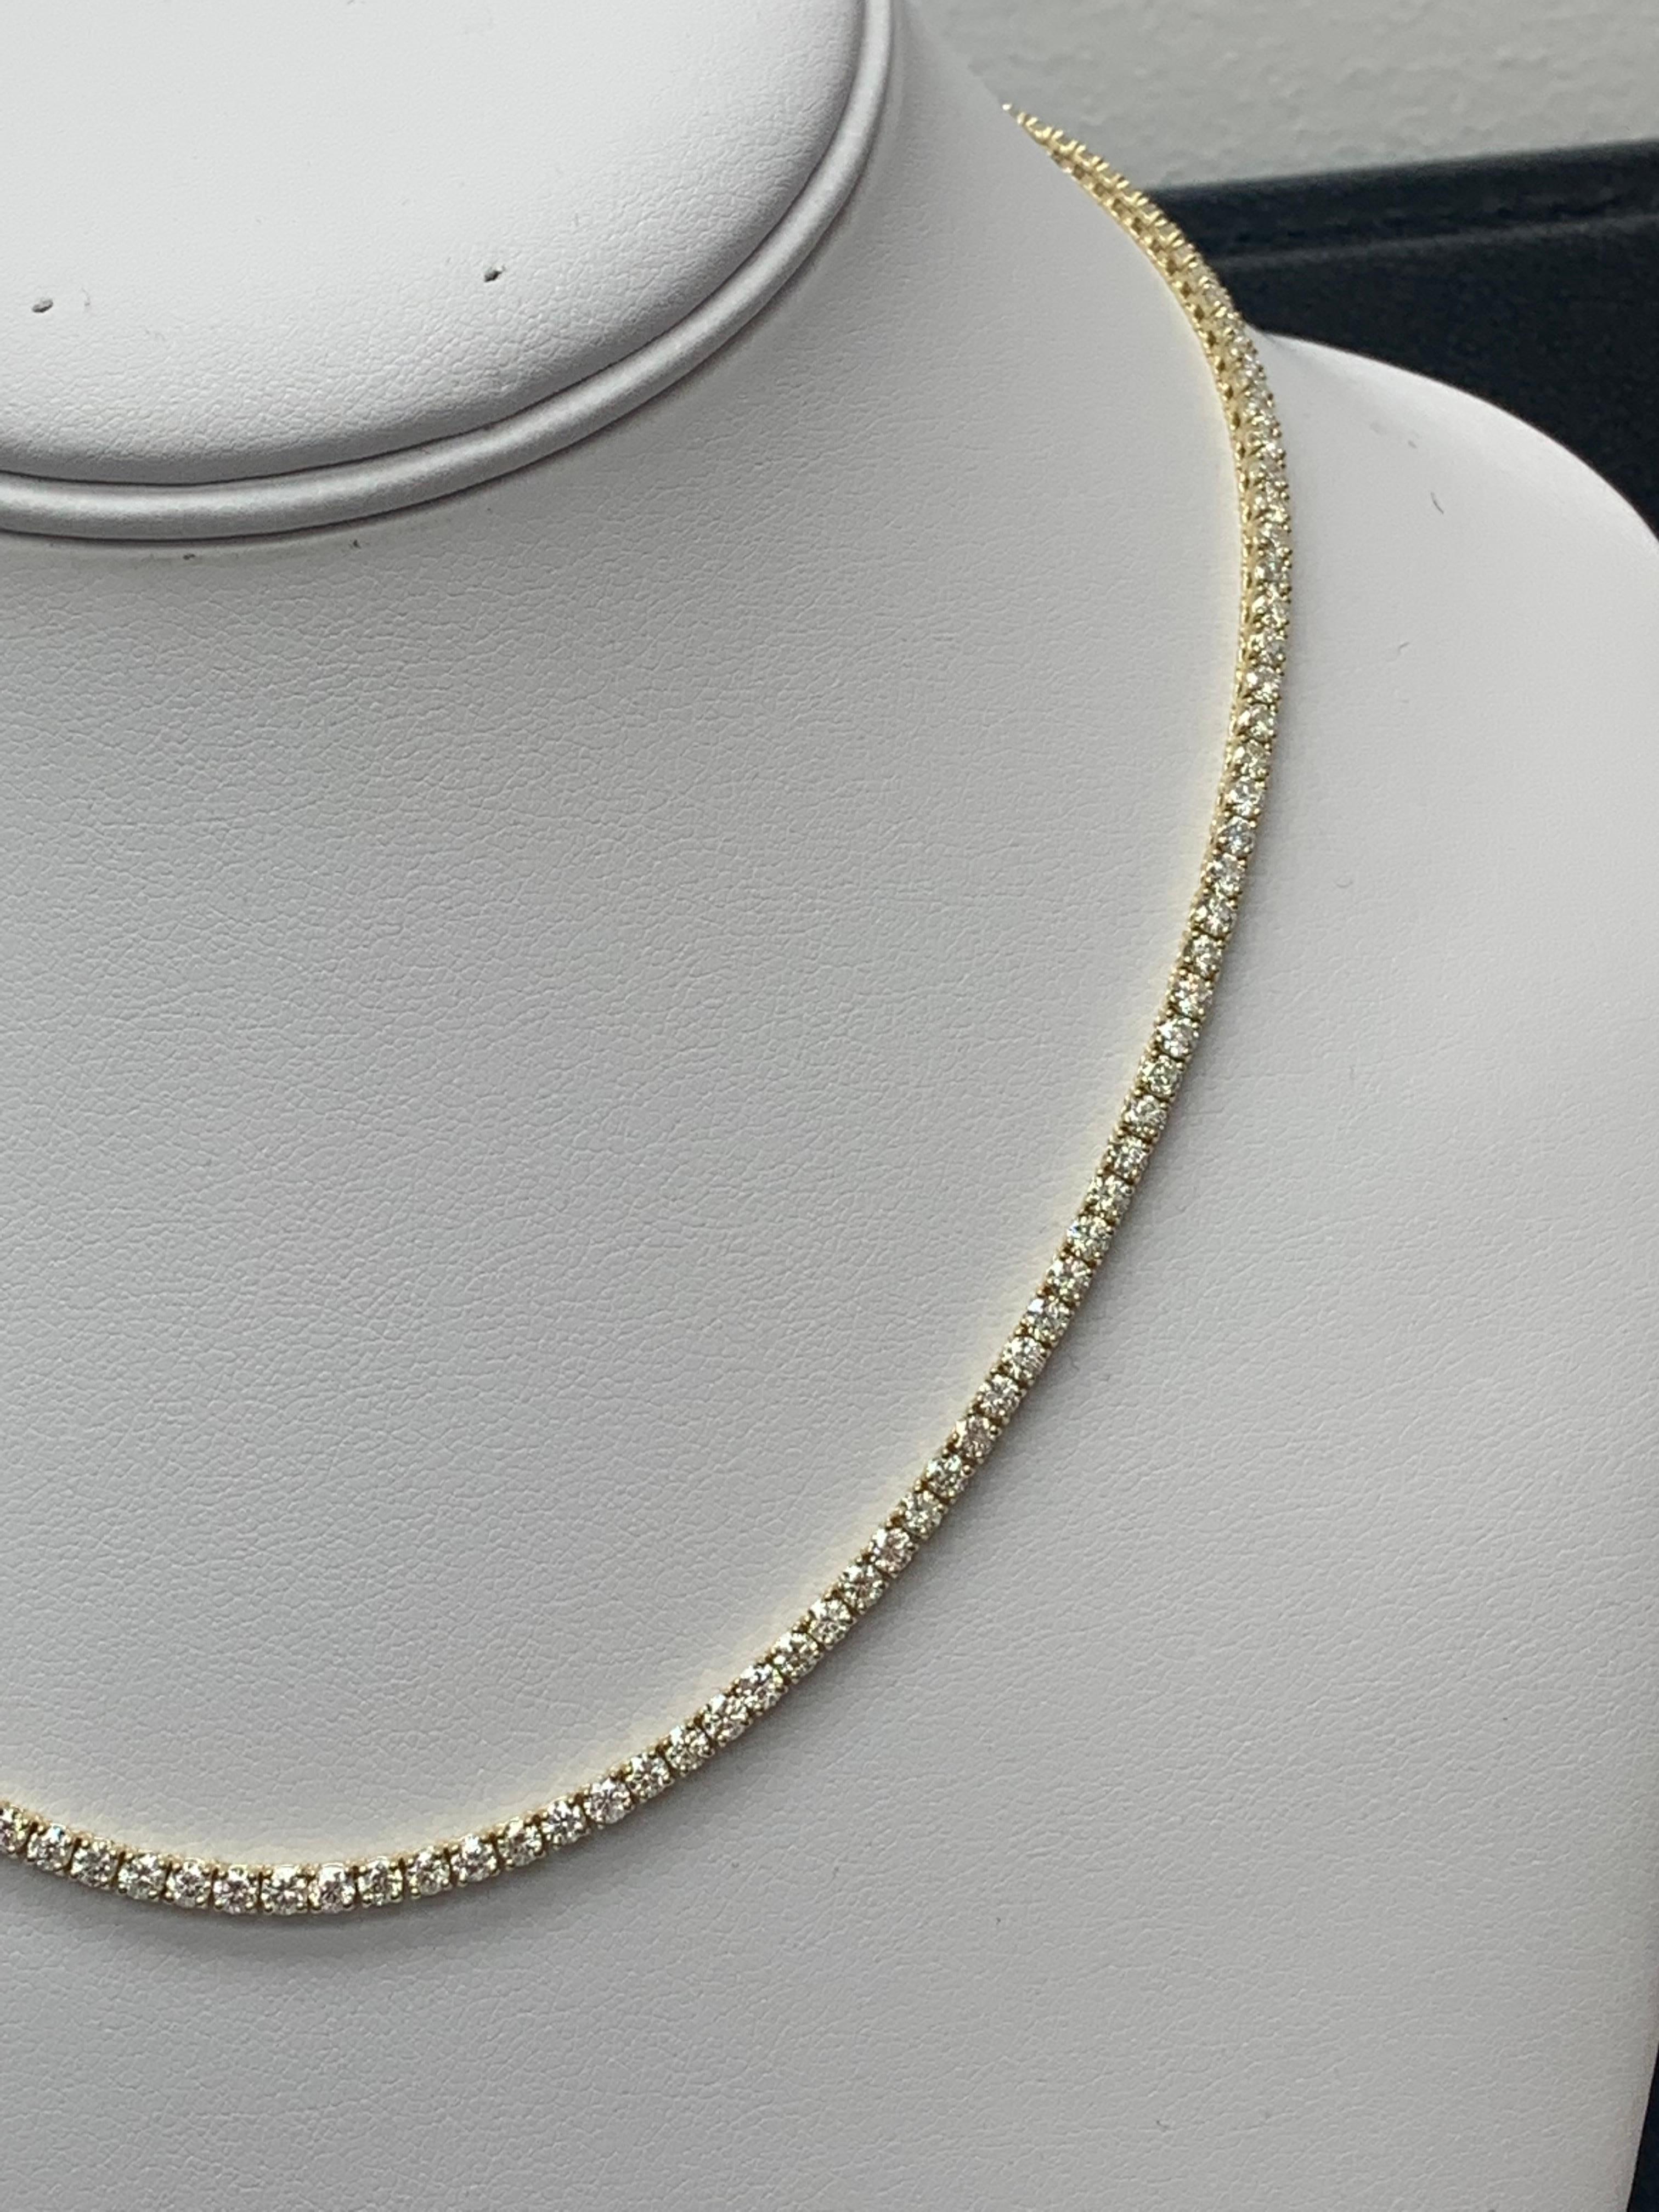 Women's 11.31 Carat Diamond Tennis Necklace in 14K Yellow Gold For Sale